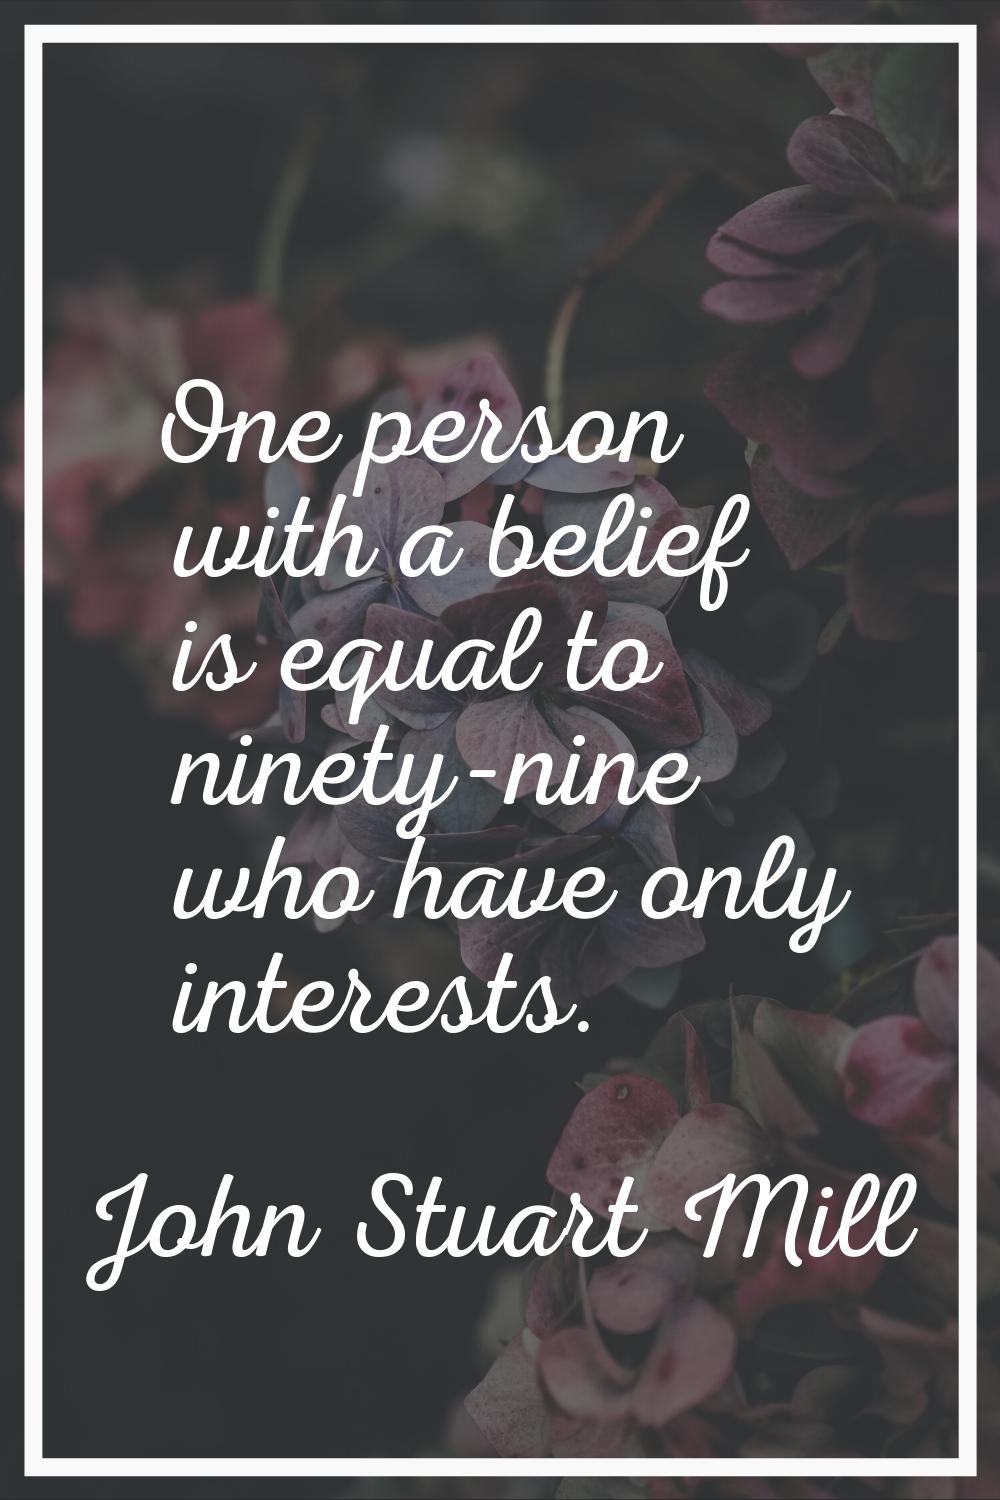 One person with a belief is equal to ninety-nine who have only interests.